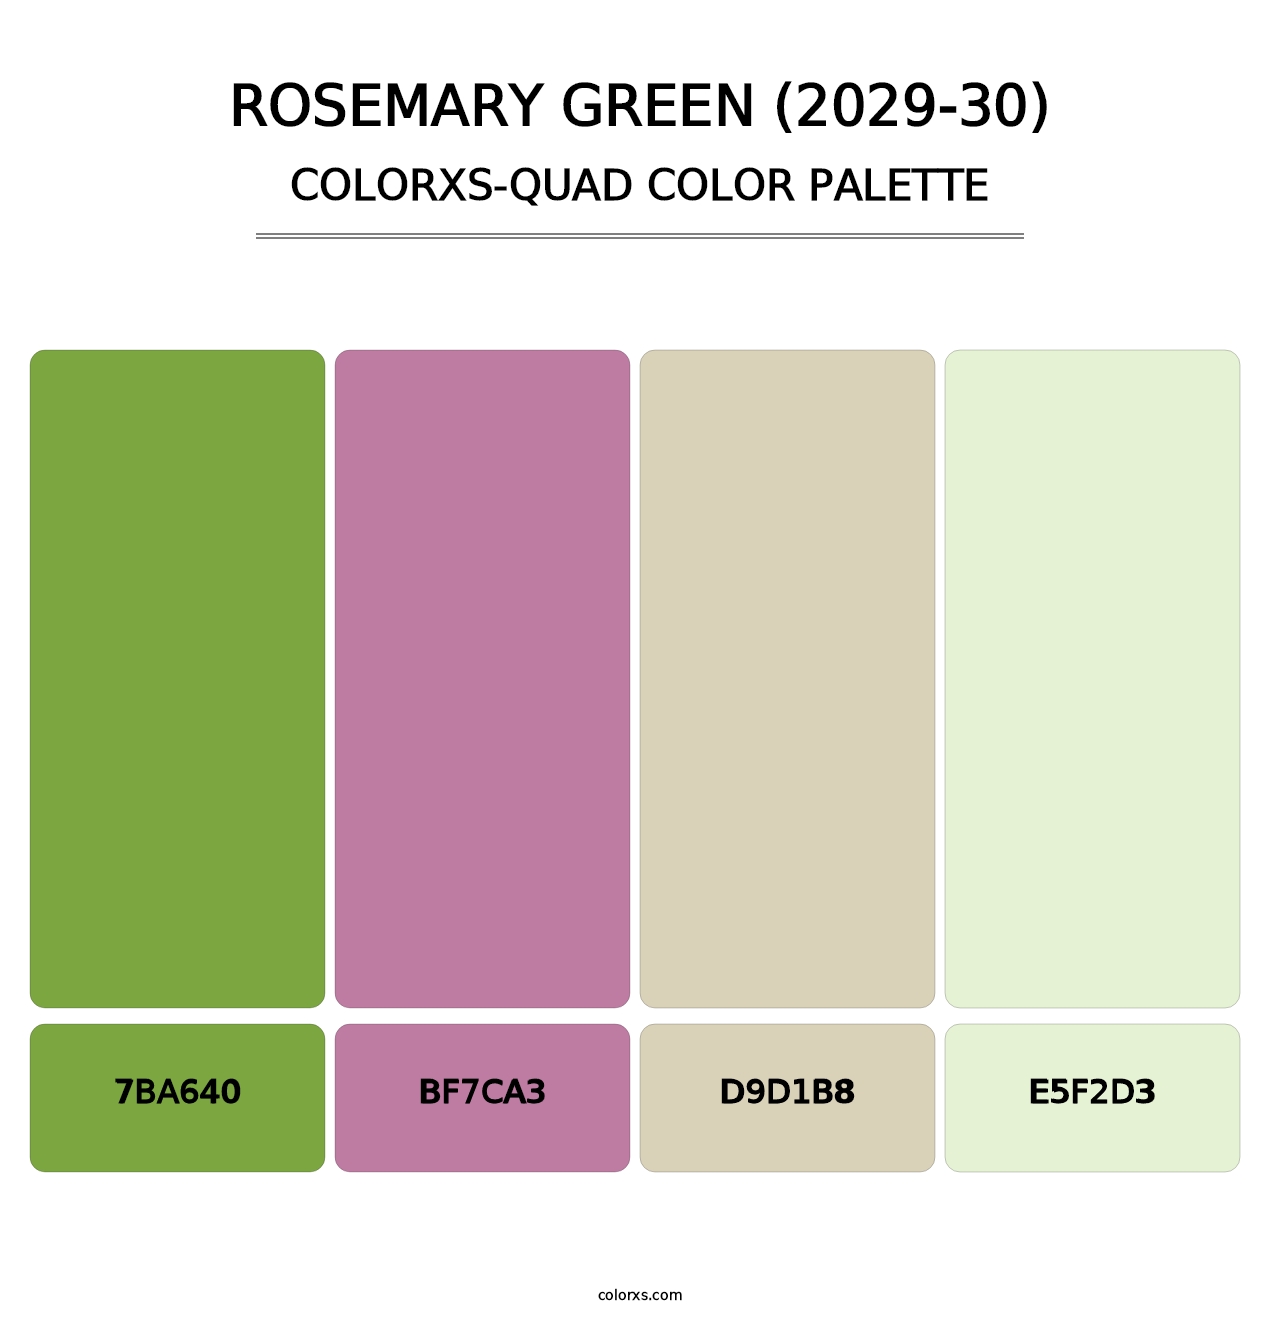 Rosemary Green (2029-30) - Colorxs Quad Palette